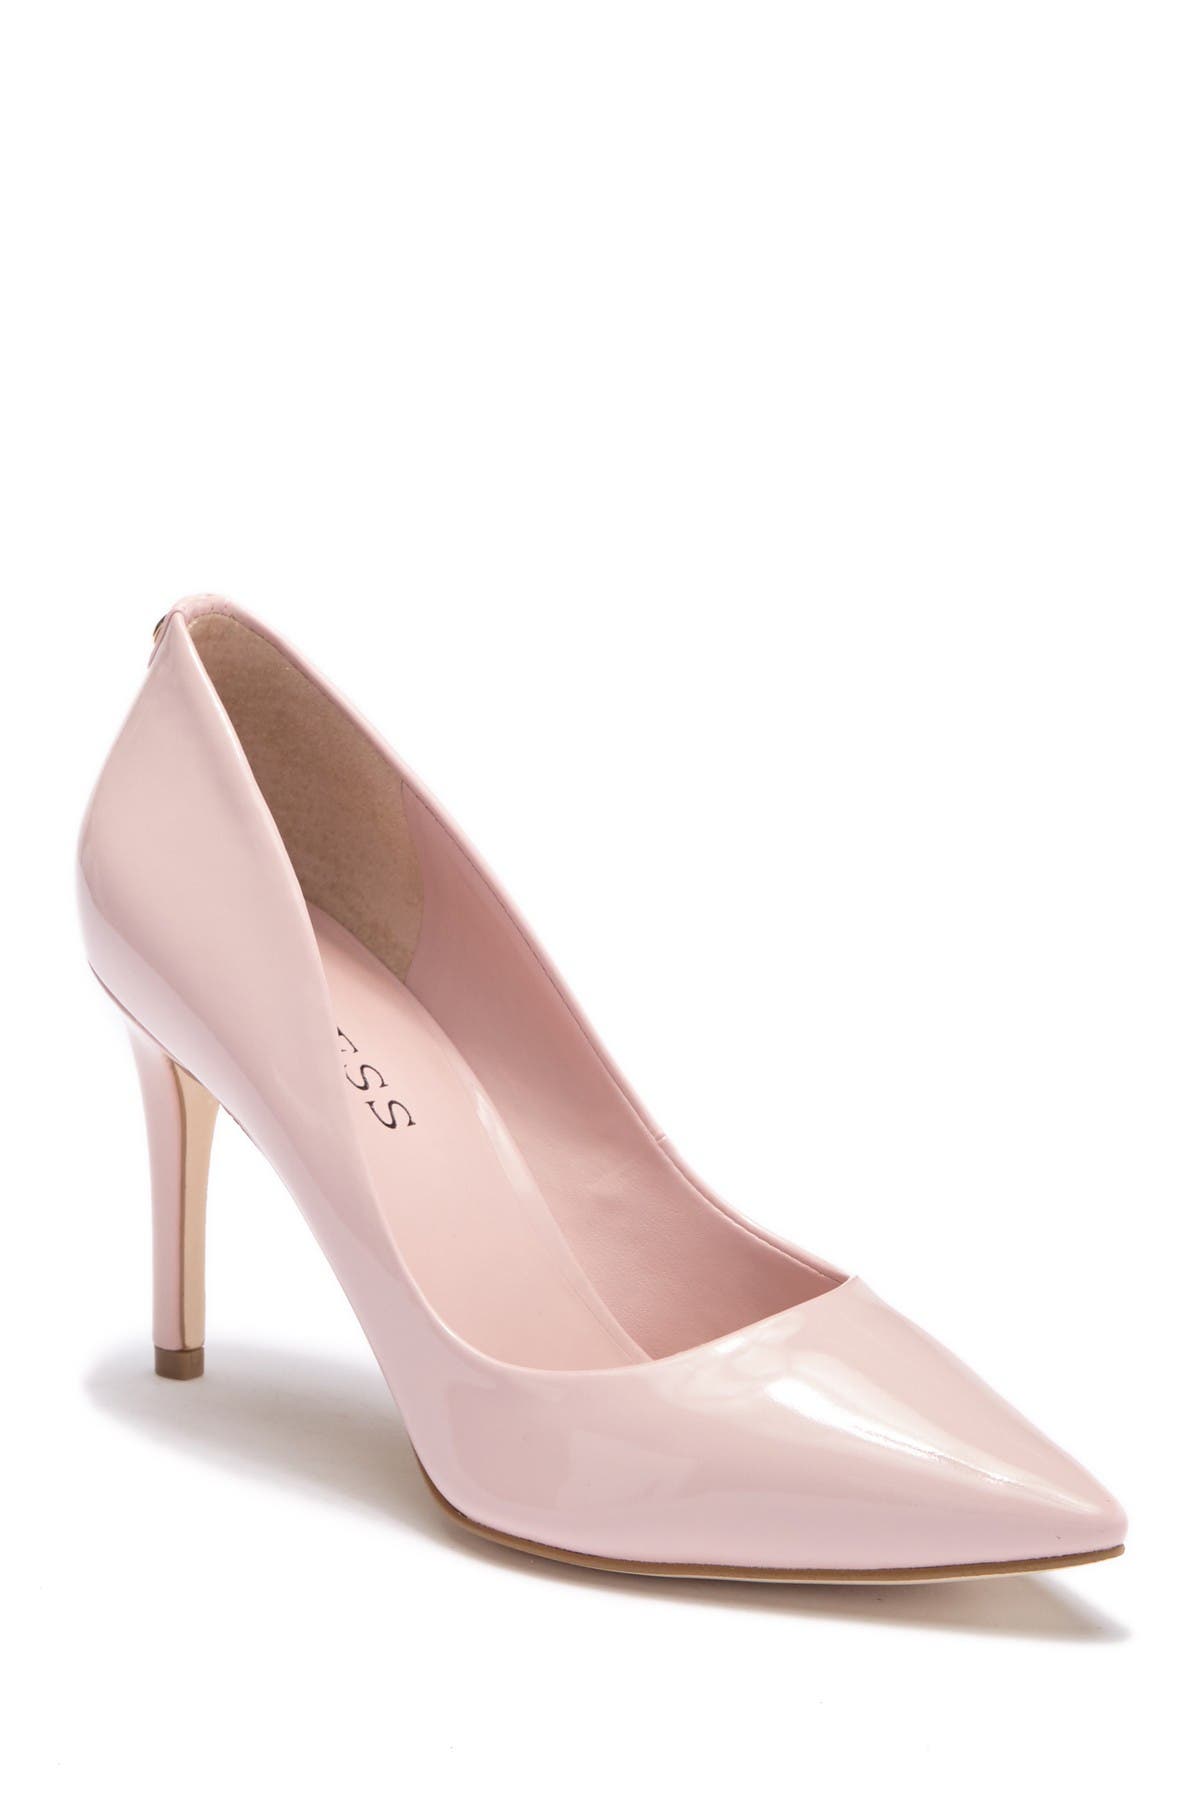 guess pointed toe pumps